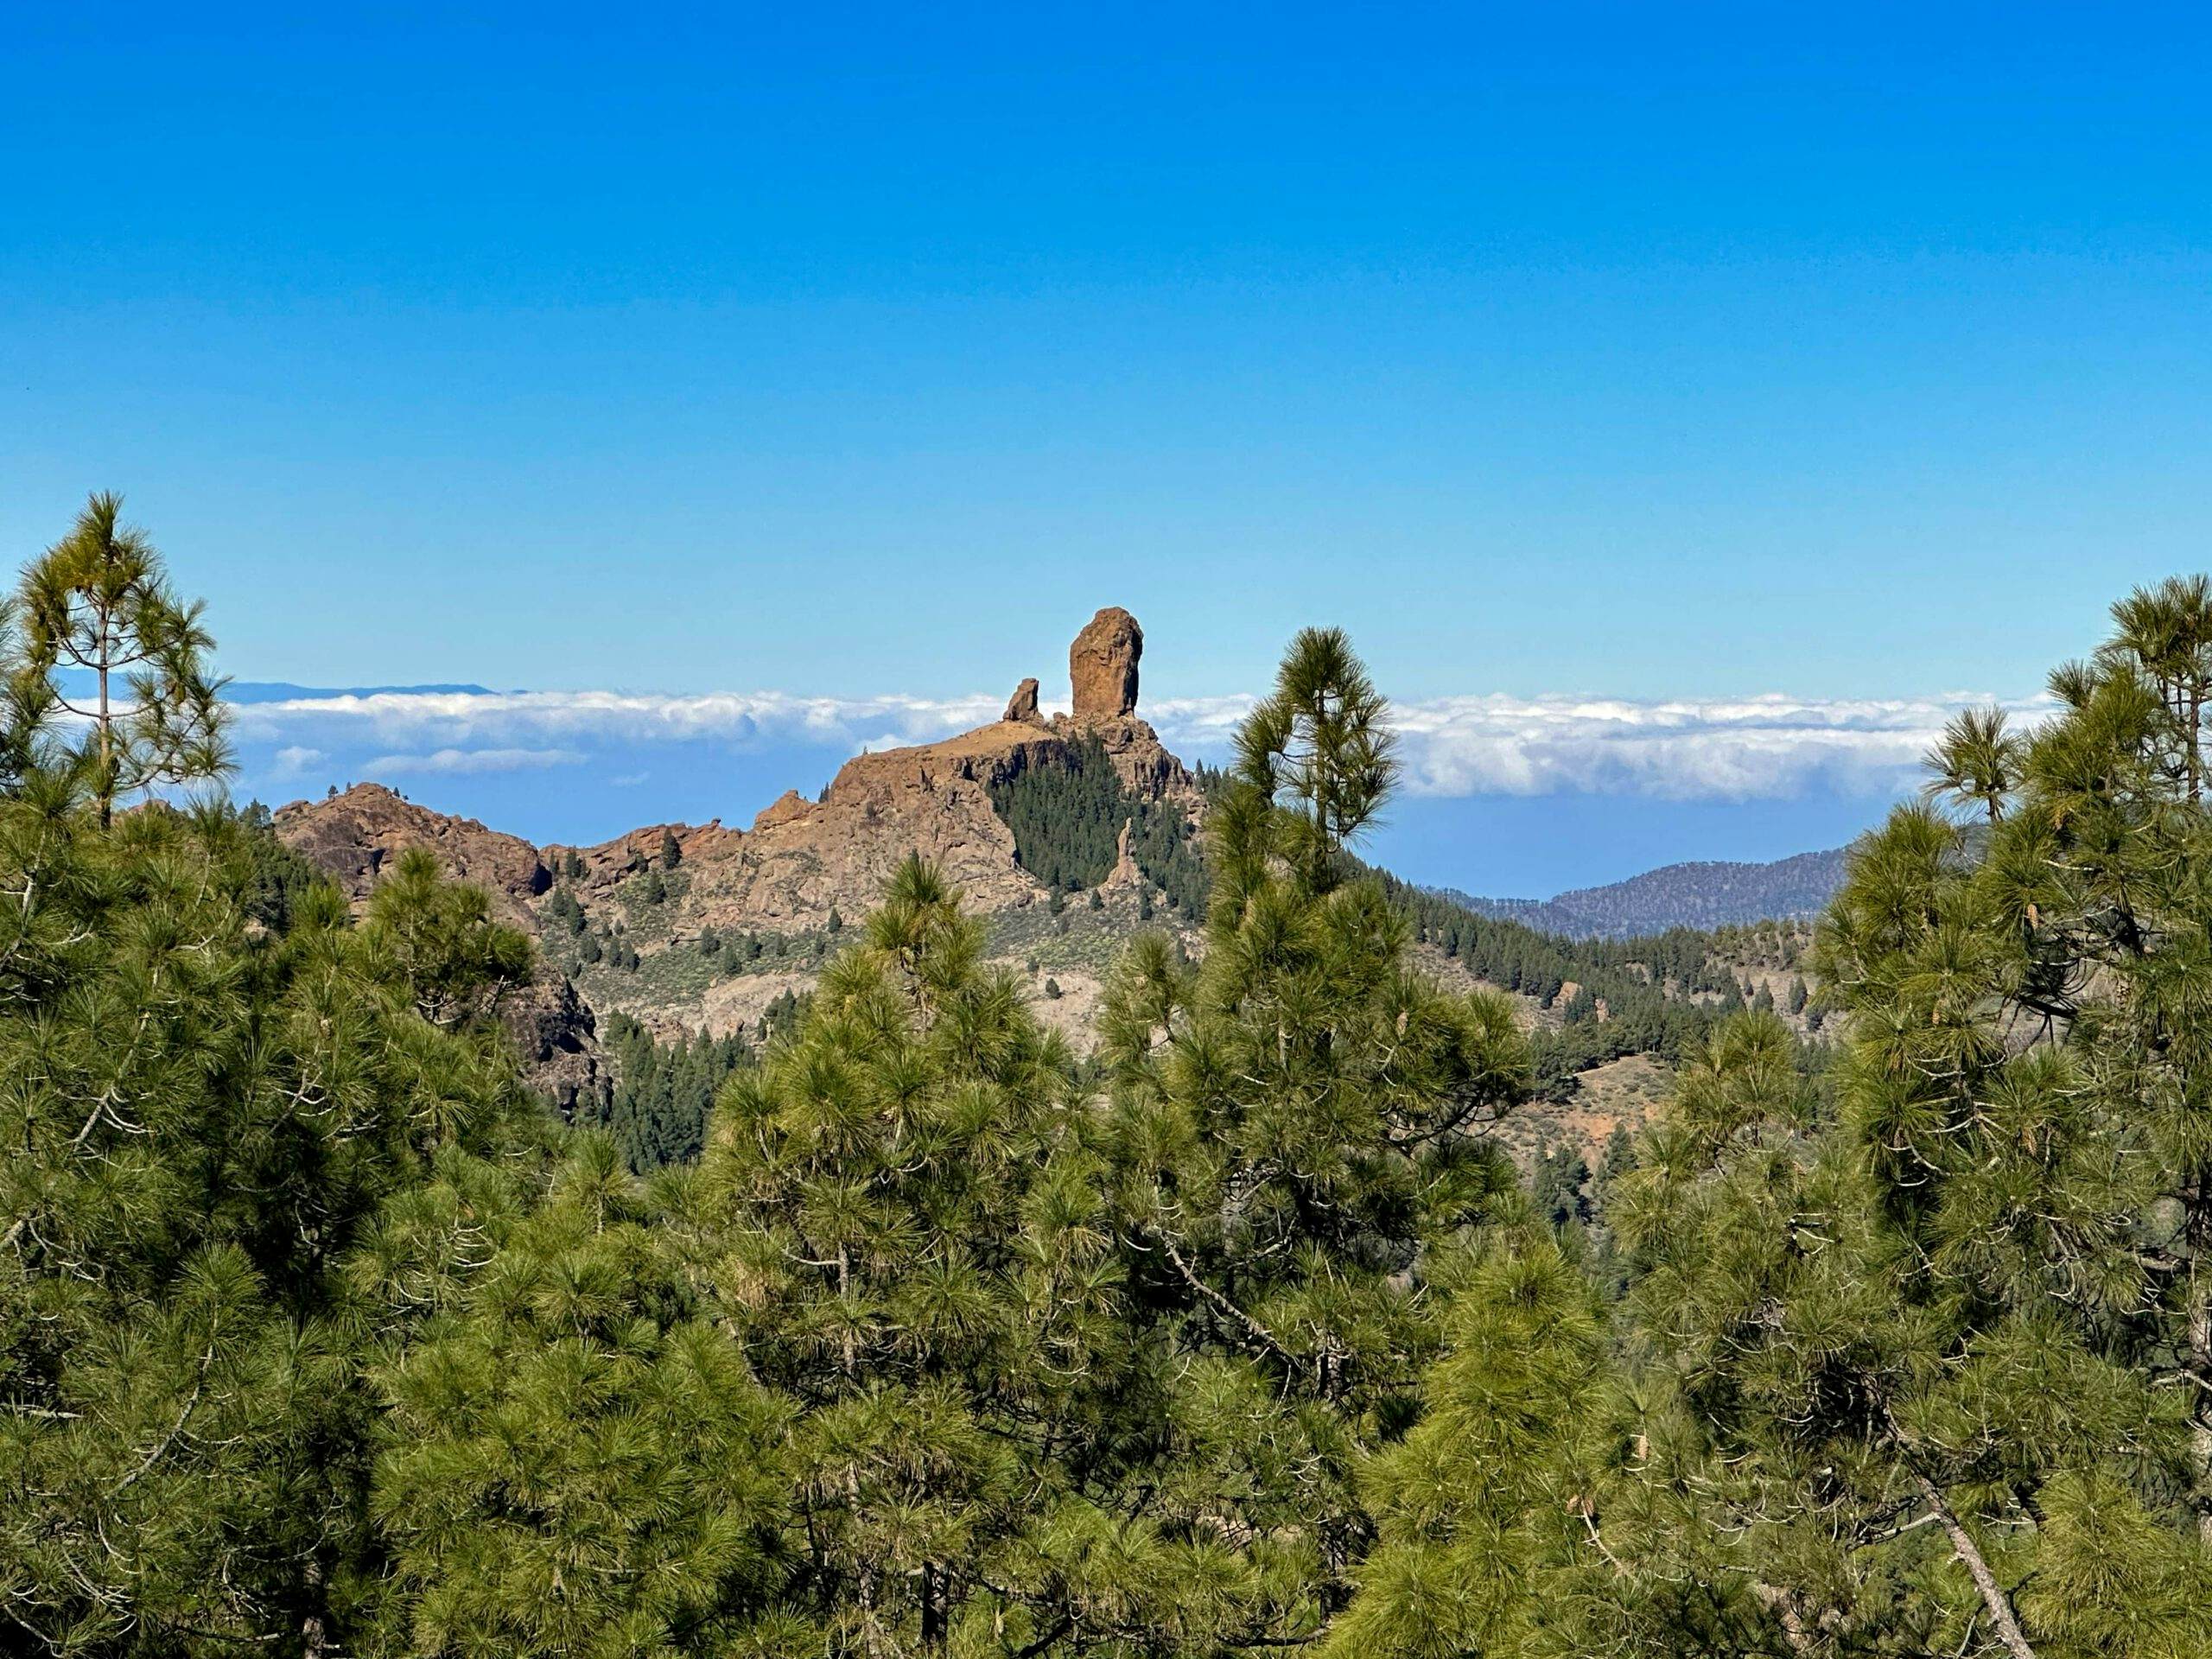 View to Roque Nublo from the hiking trail